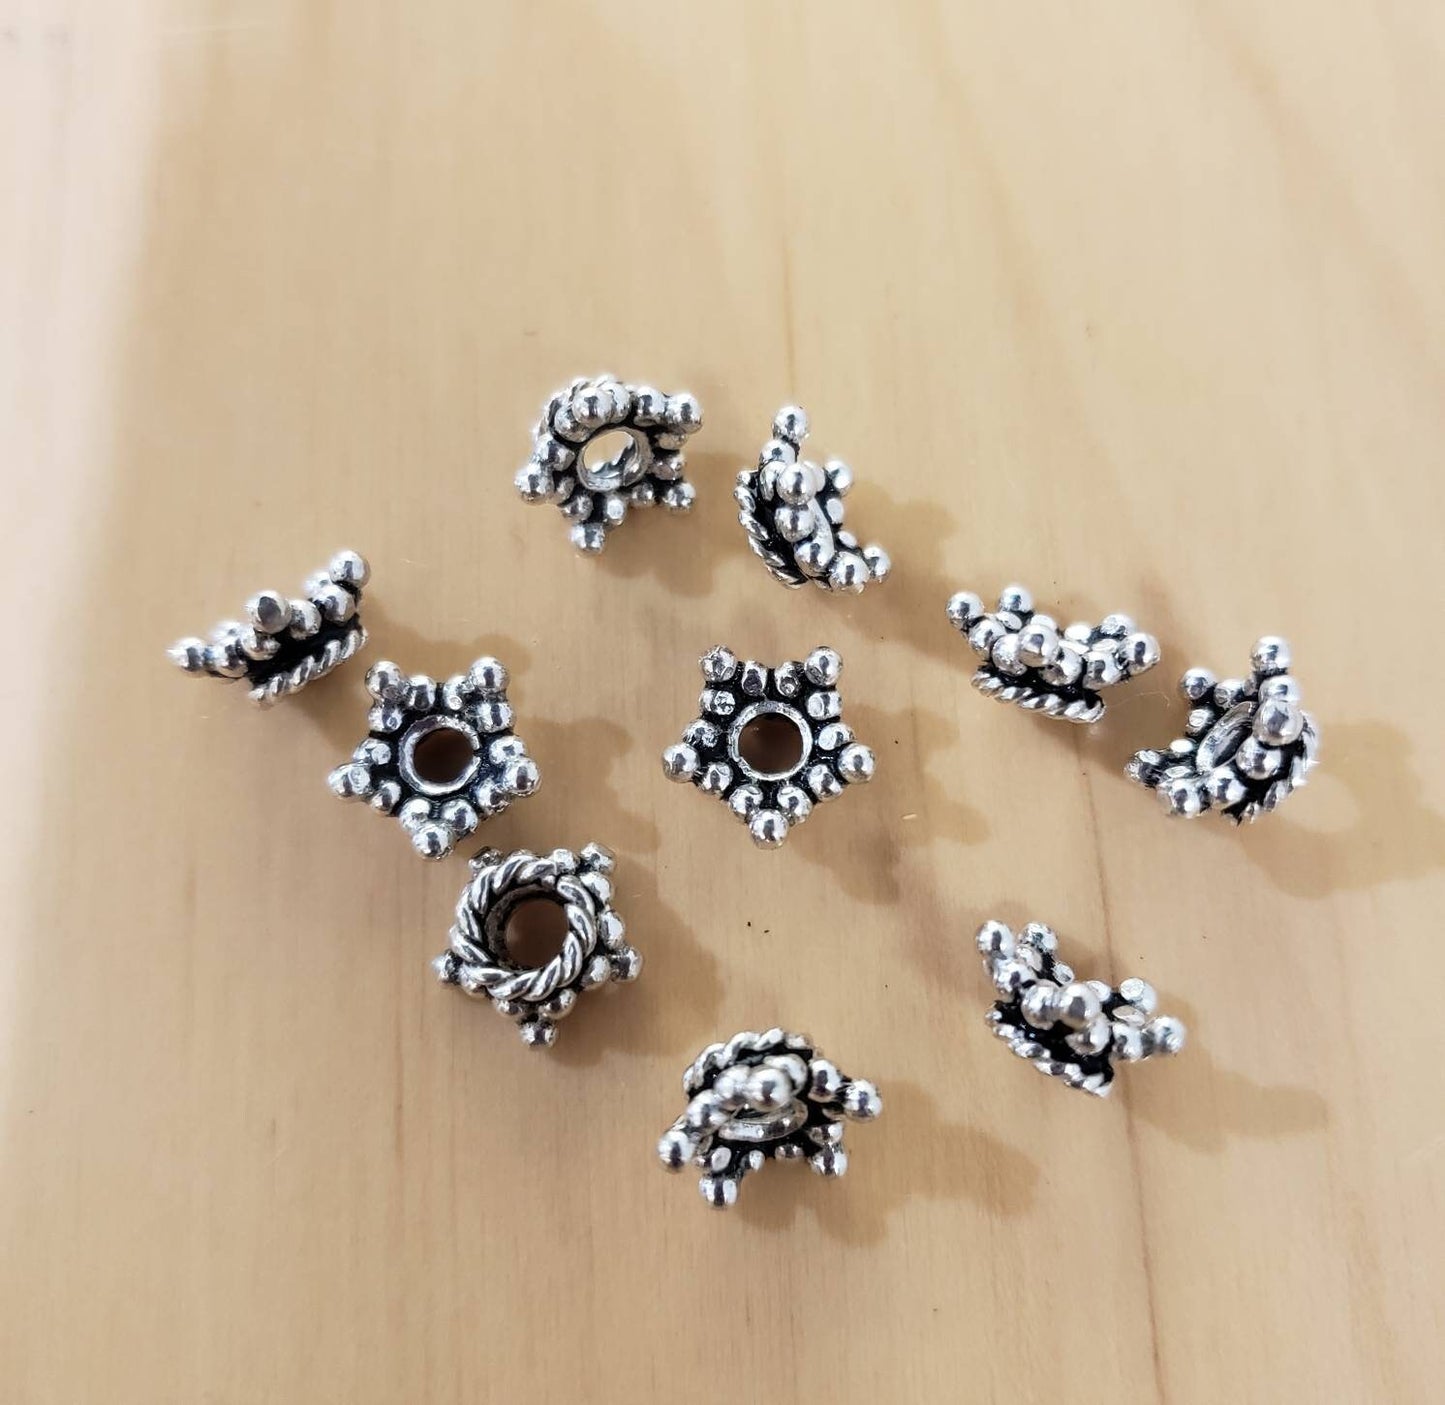 10 pcs Sterling silver bali bead cap 5.5mm 5 point crown cap , heavy weight, Vintage Handmade  for jewelry making earring supplies.